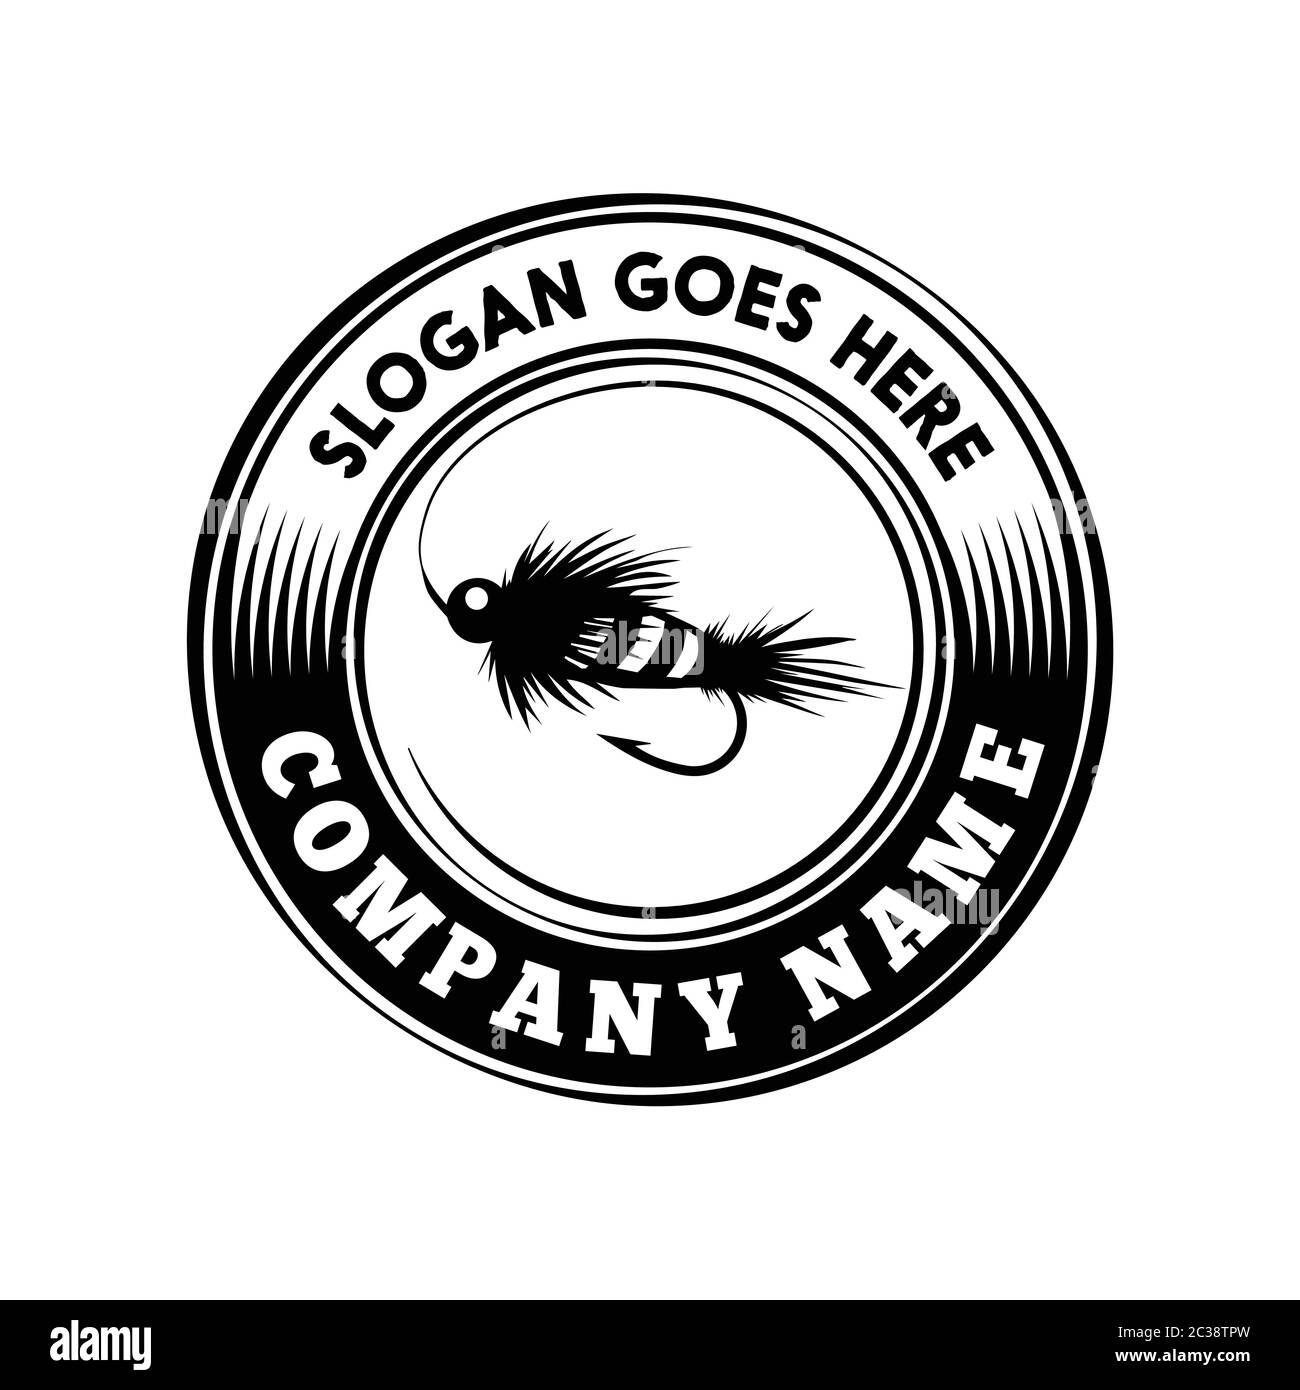 https://c8.alamy.com/comp/2C38TPW/fly-fishing-logo-vector-and-illustration-2C38TPW.jpg